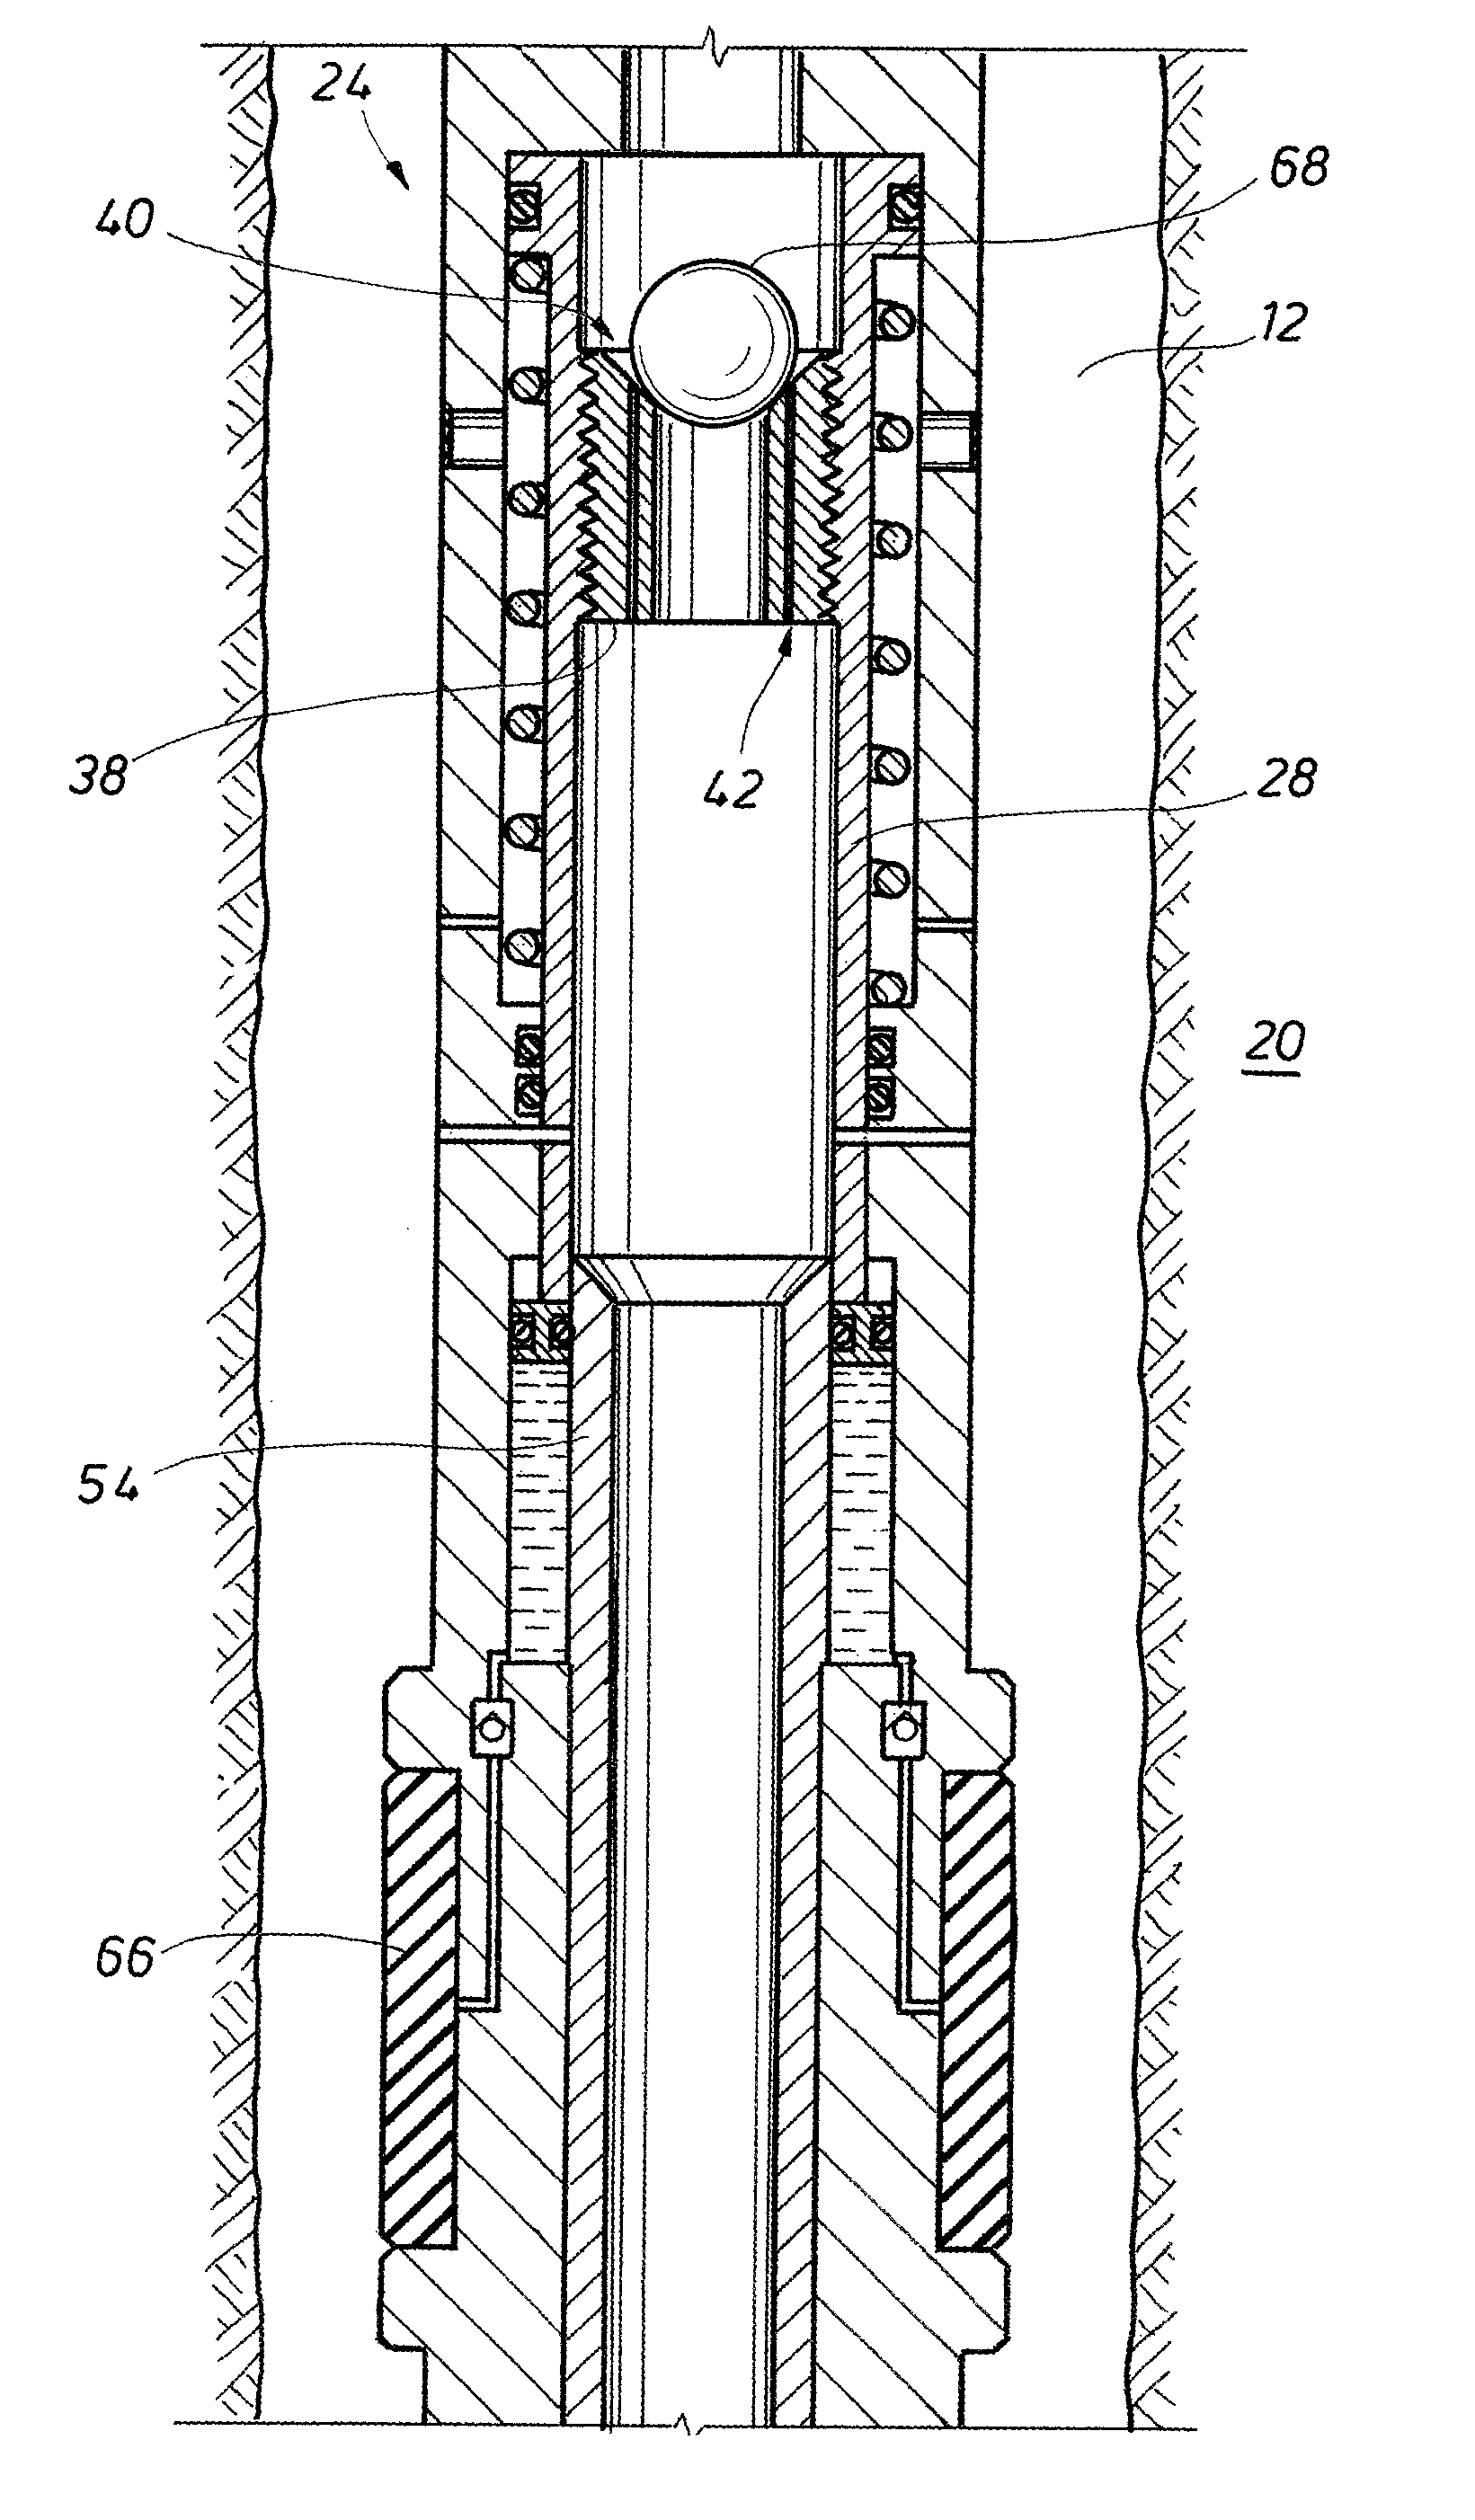 Sliding stage cementing tool and method